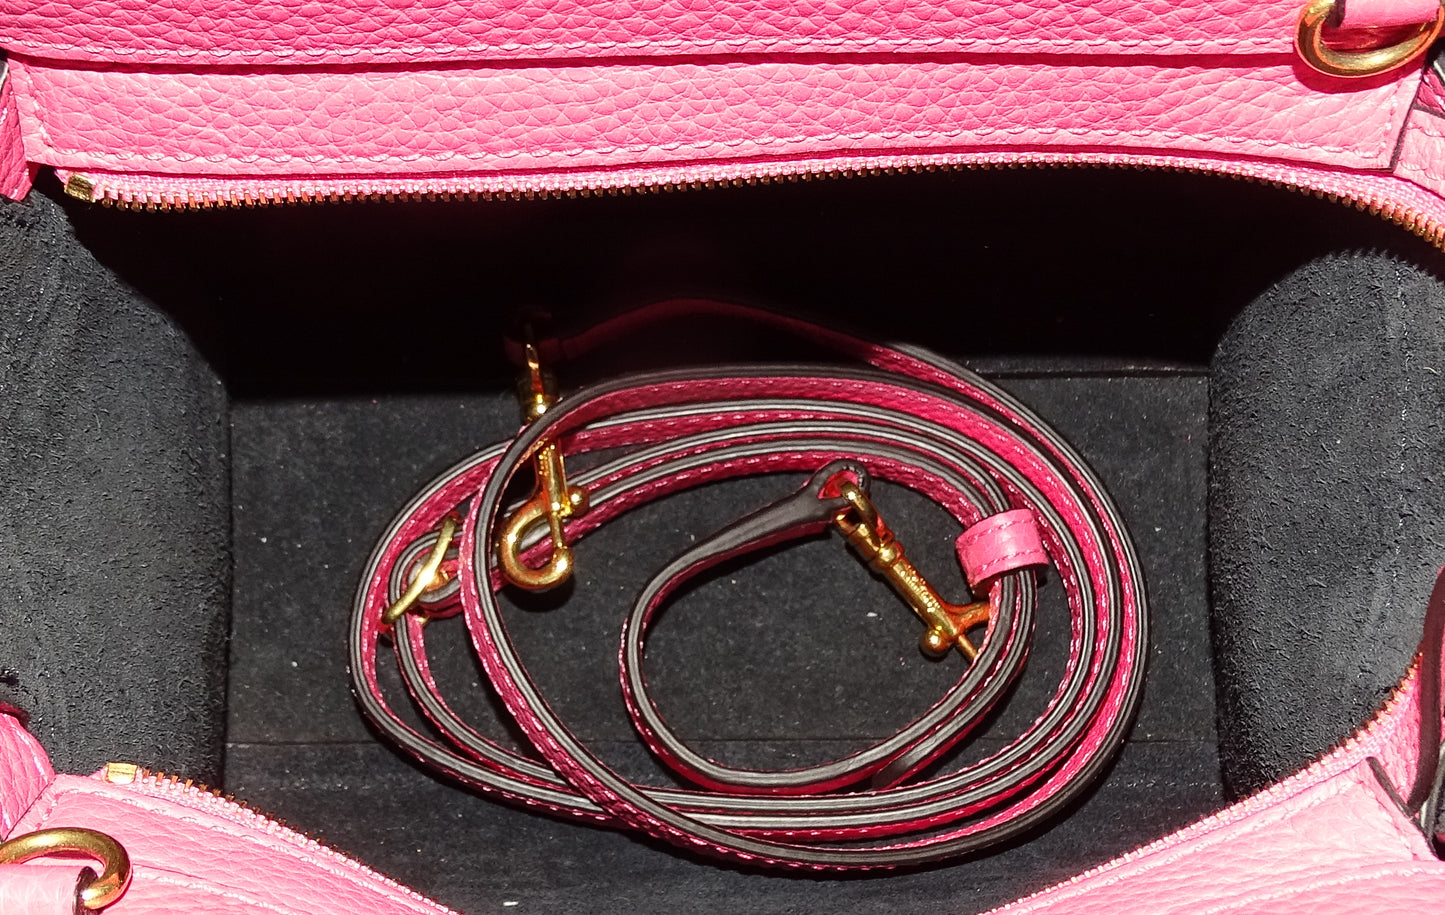 Mulberry Pink Heavy Grain Micro Zipped Bayswater